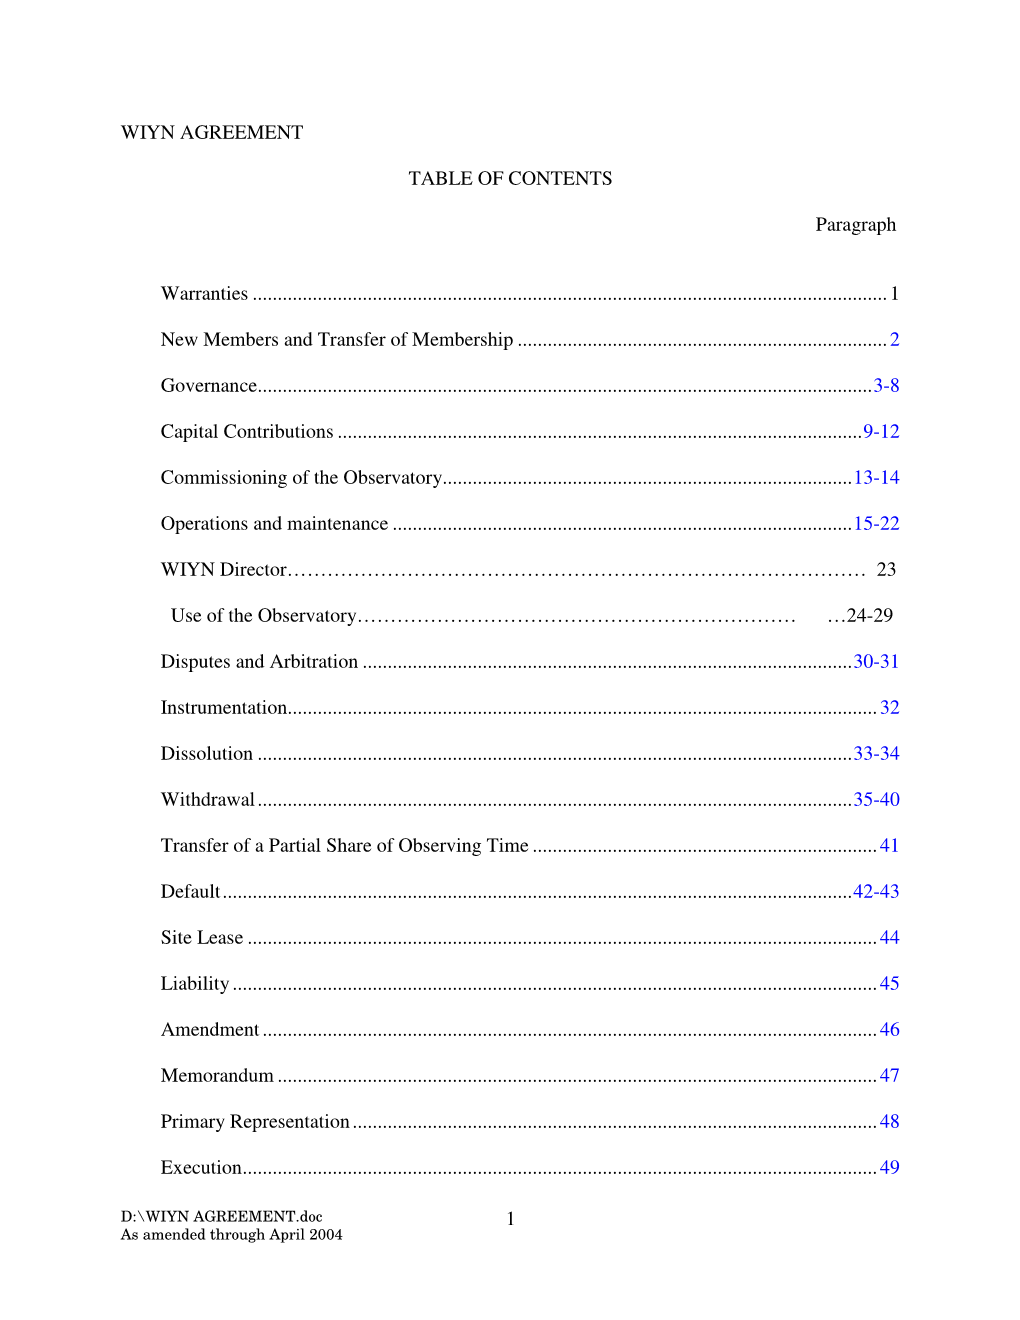 1 WIYN AGREEMENT TABLE of CONTENTS Paragraph Warranties